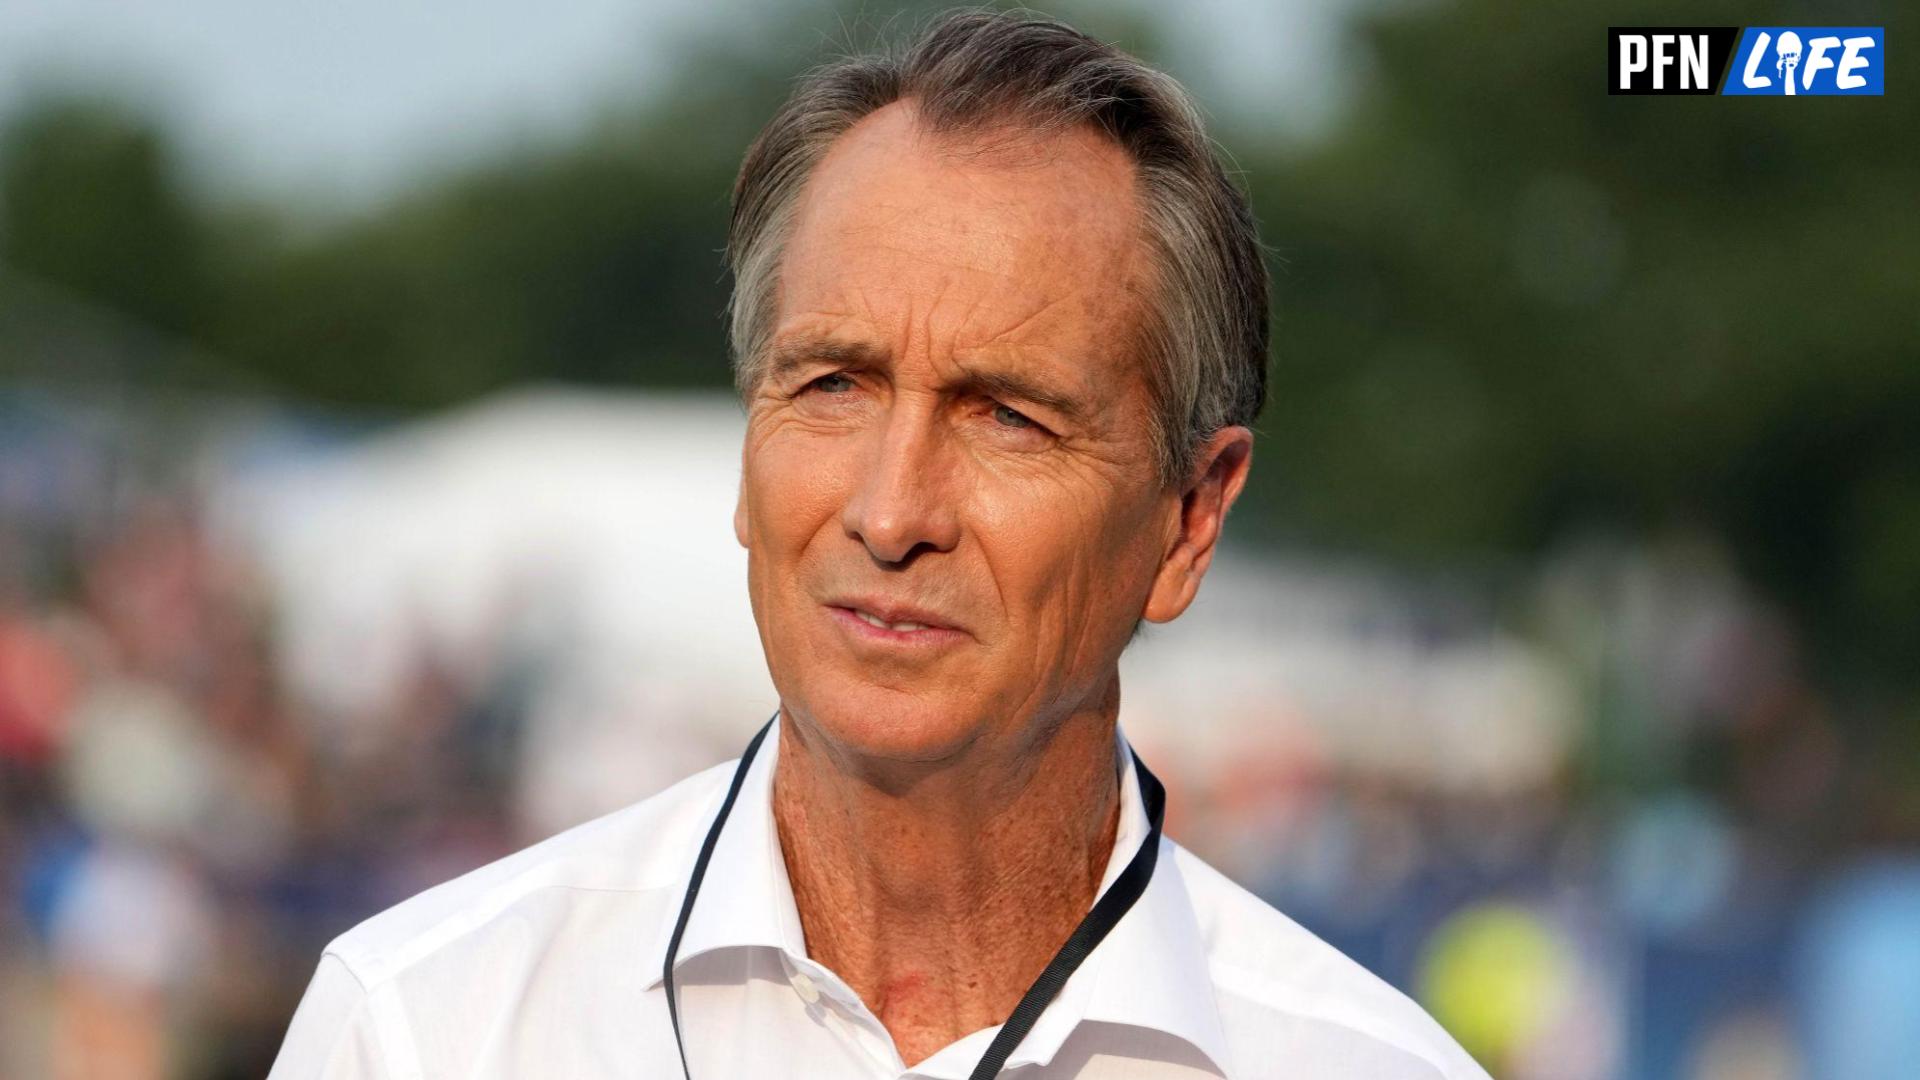 Cris Collinsworth's Net Worth: How Much Is the Broadcasting Hall